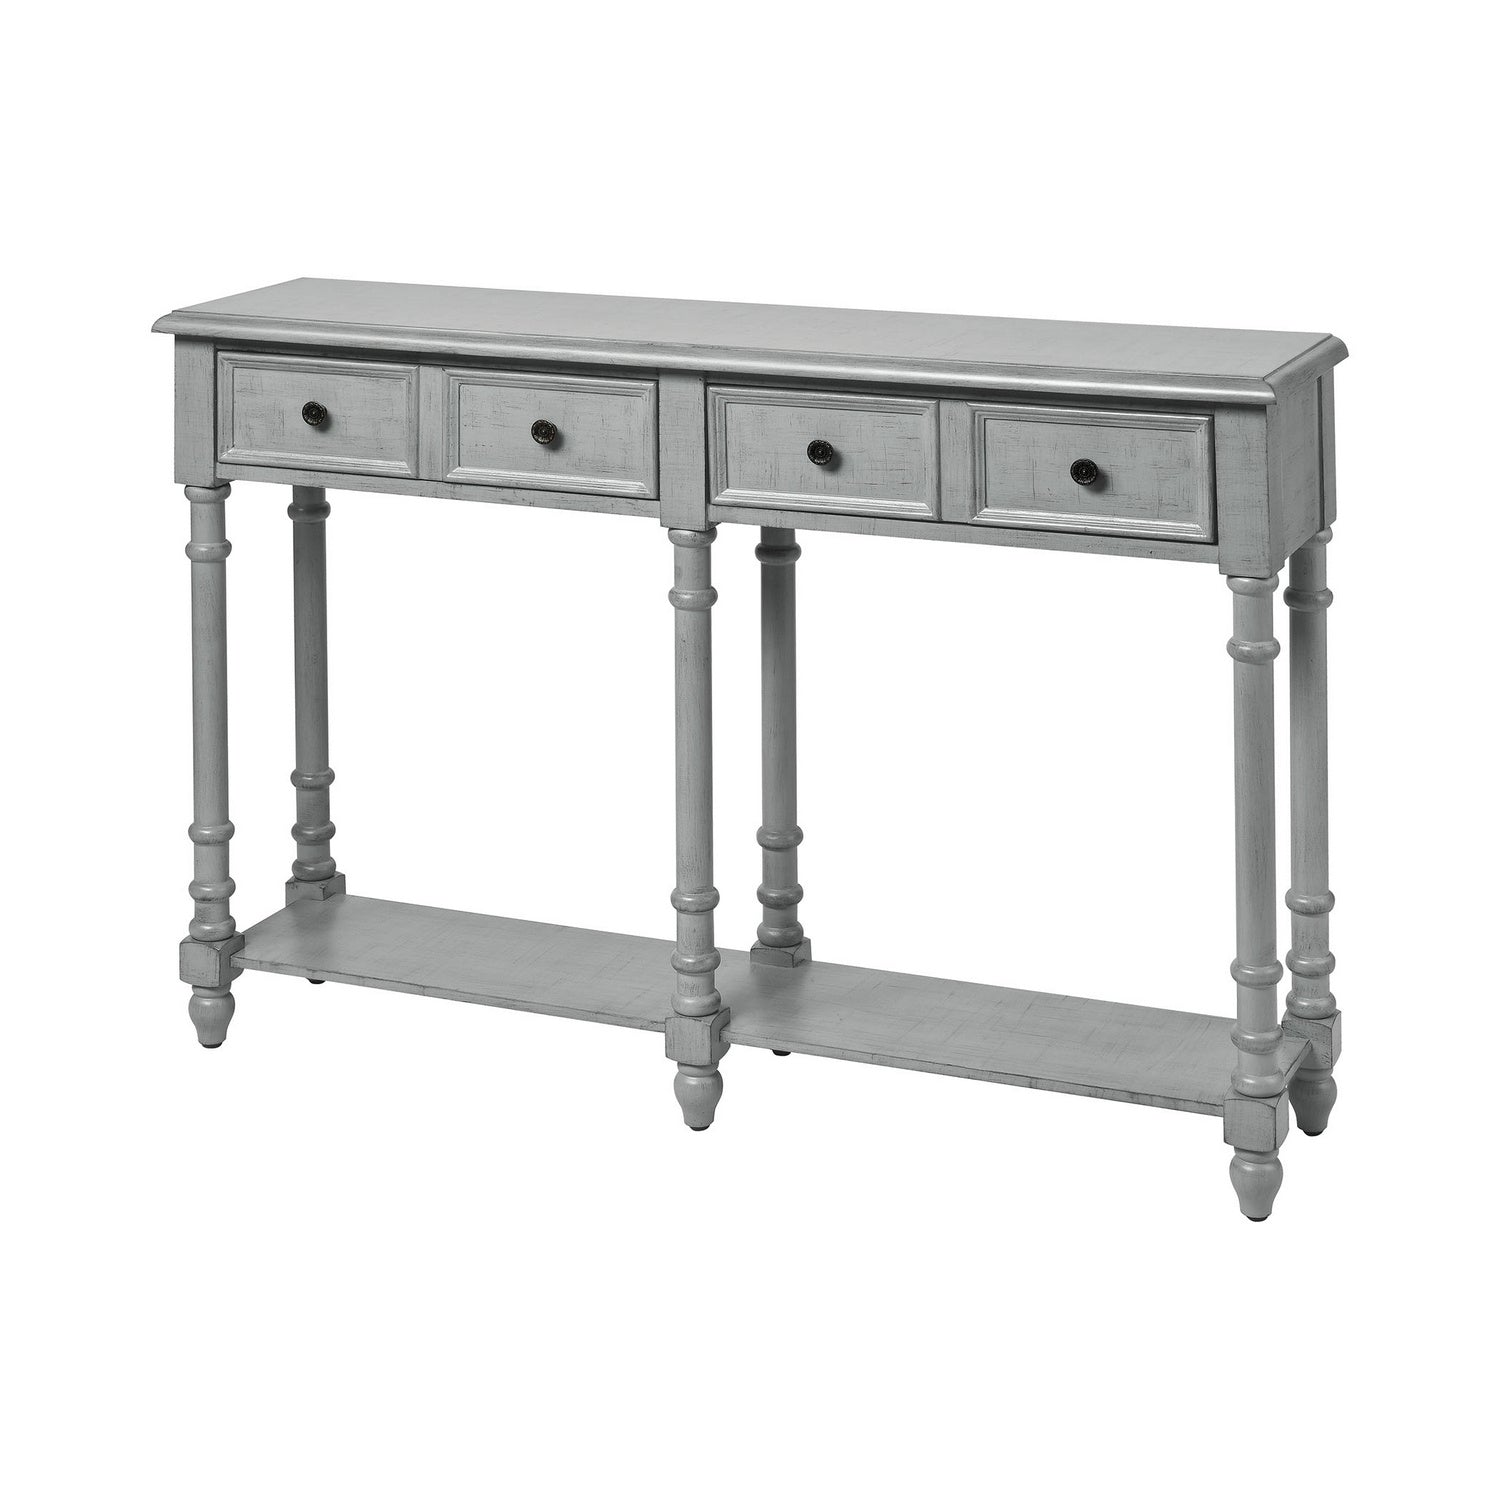 ELK Home - 16937 - Console Table - Hager - Gray